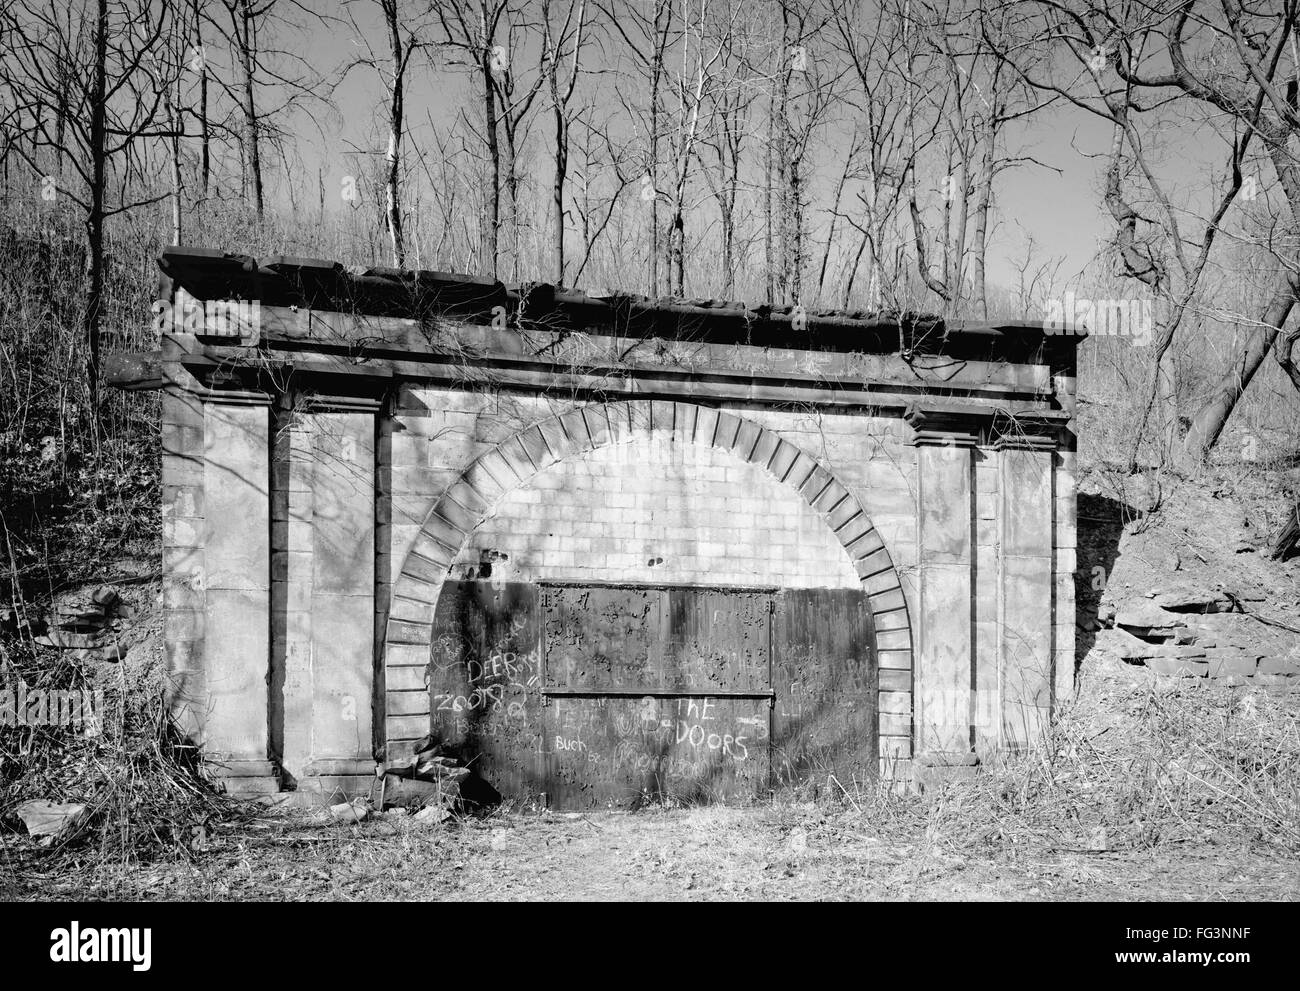 PENNSYLVANIA: TUNNEL, 1987. /nThe south portal of the Staple Bend Tunnel, built for the Allegheny Portage Railroad, in Pennsylvania, c1833. Photograph, 1987. Stock Photo